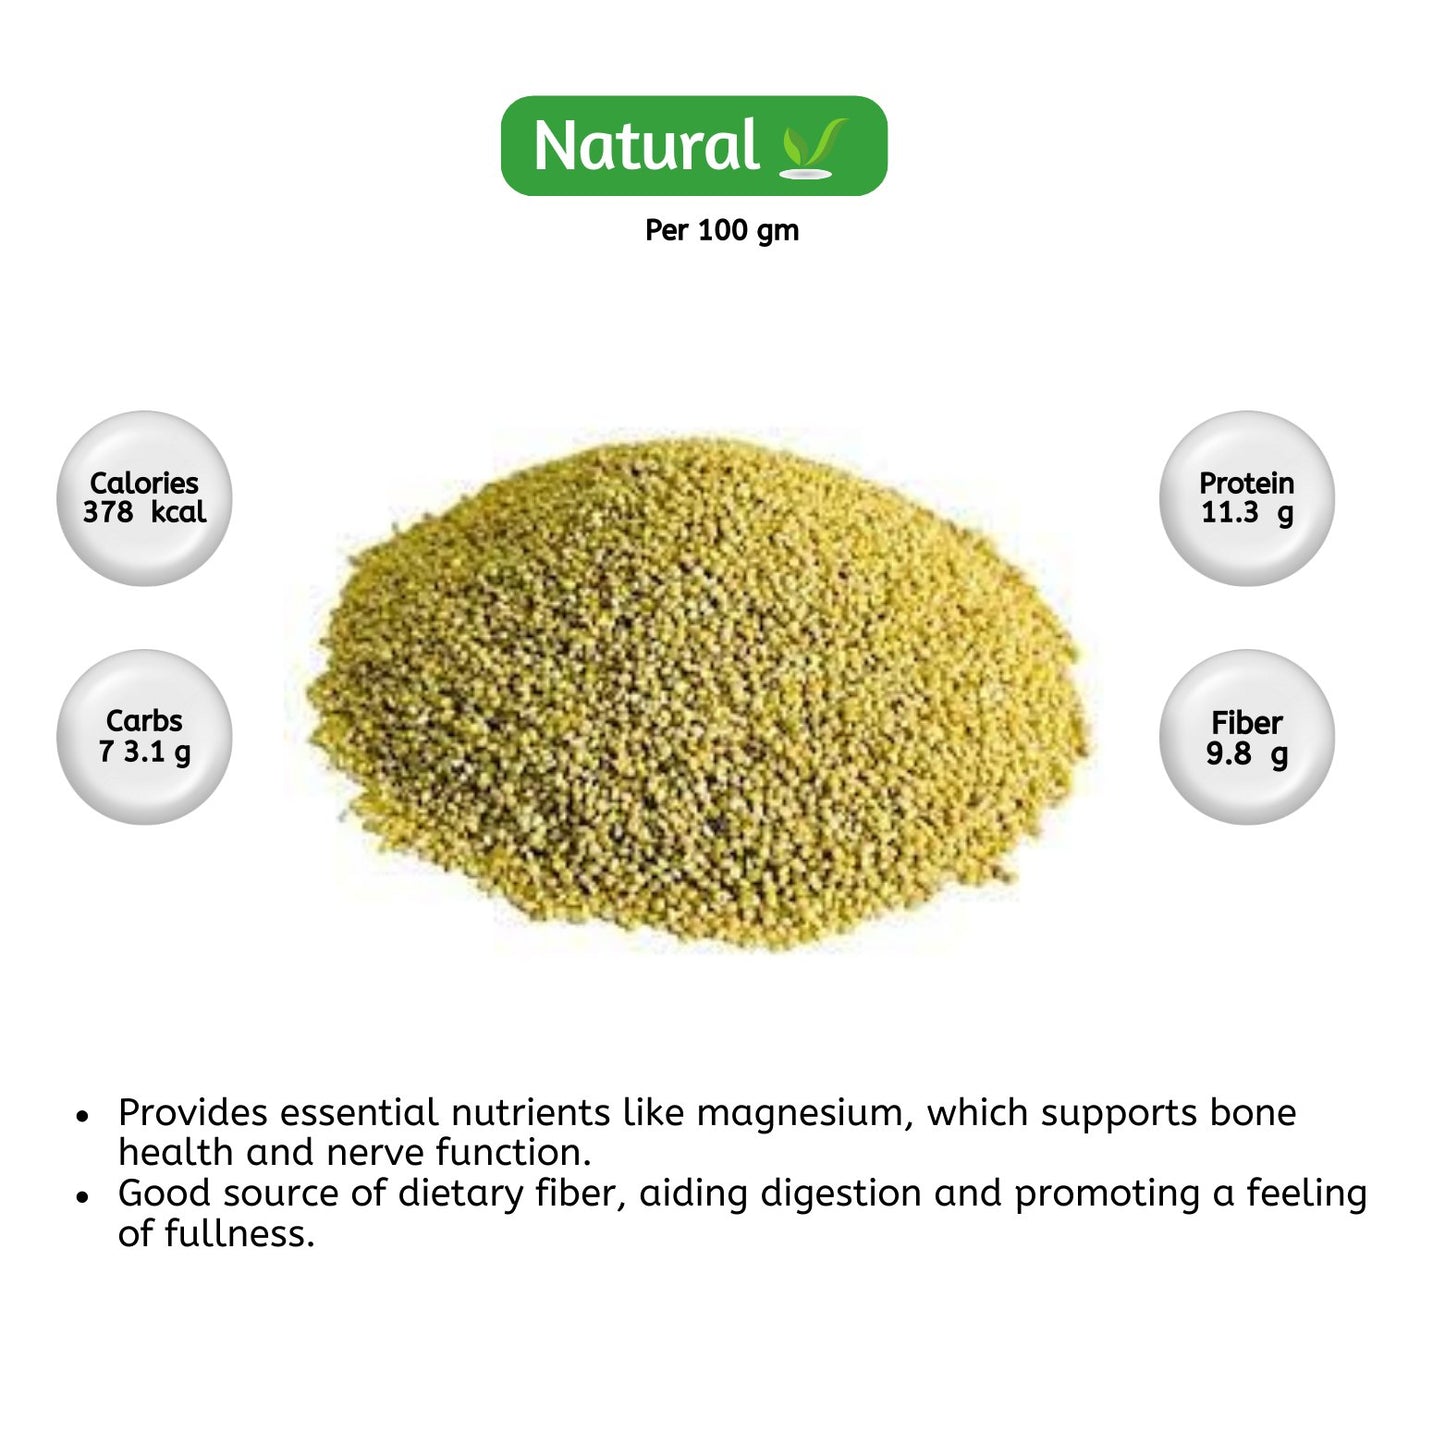 organic Browntop Millet - Online store for organic products in Bangalore - Grains | Groceries